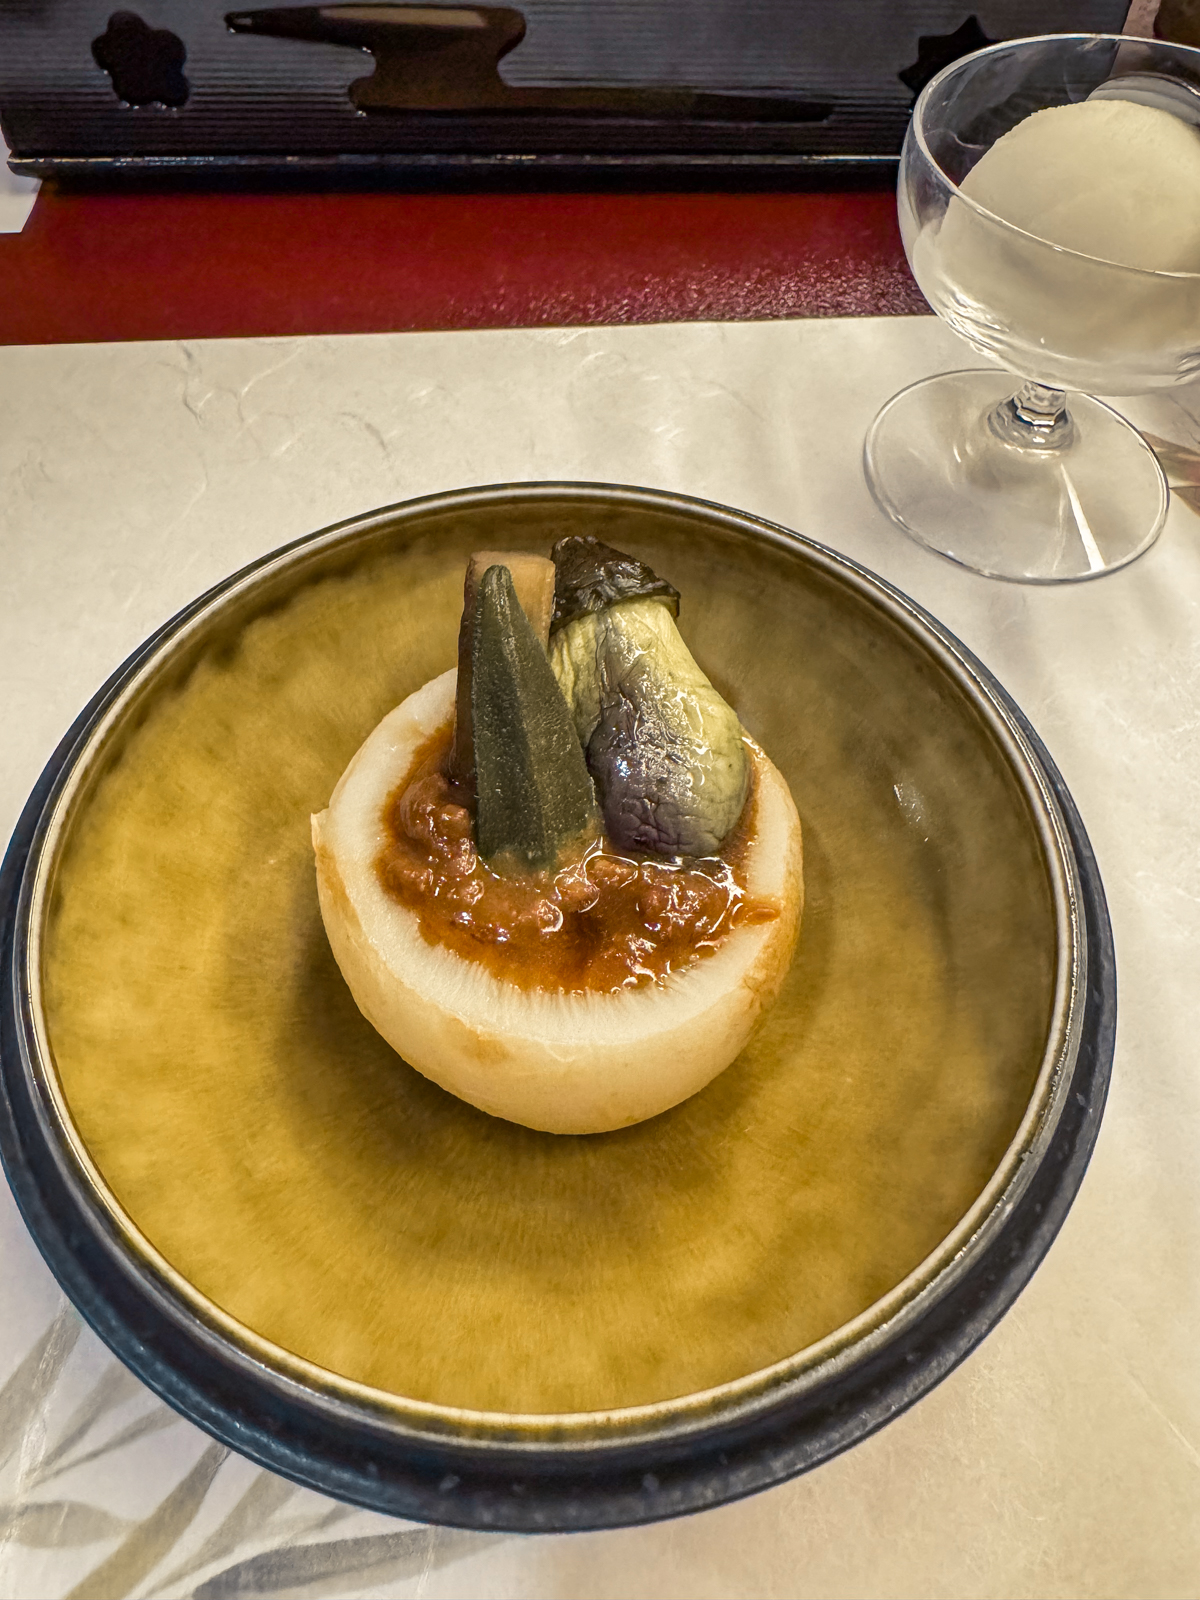 Minced beef with small eggplant, okra in a turnip bowl.